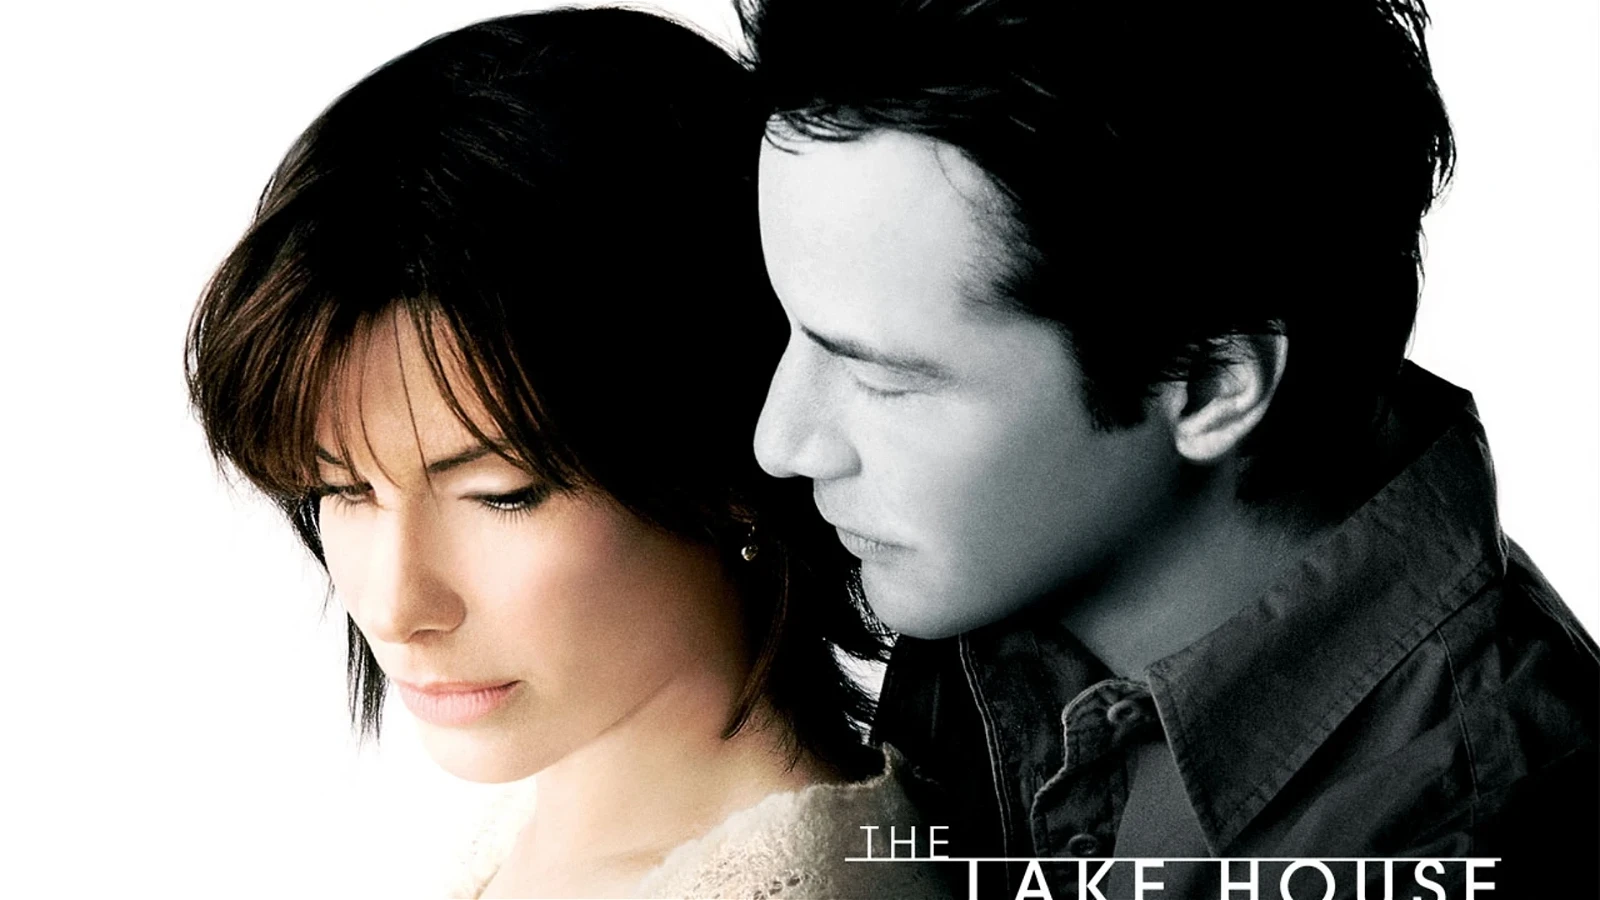 Keanu Reeves and Sandra Bullock starred together in The Lake House